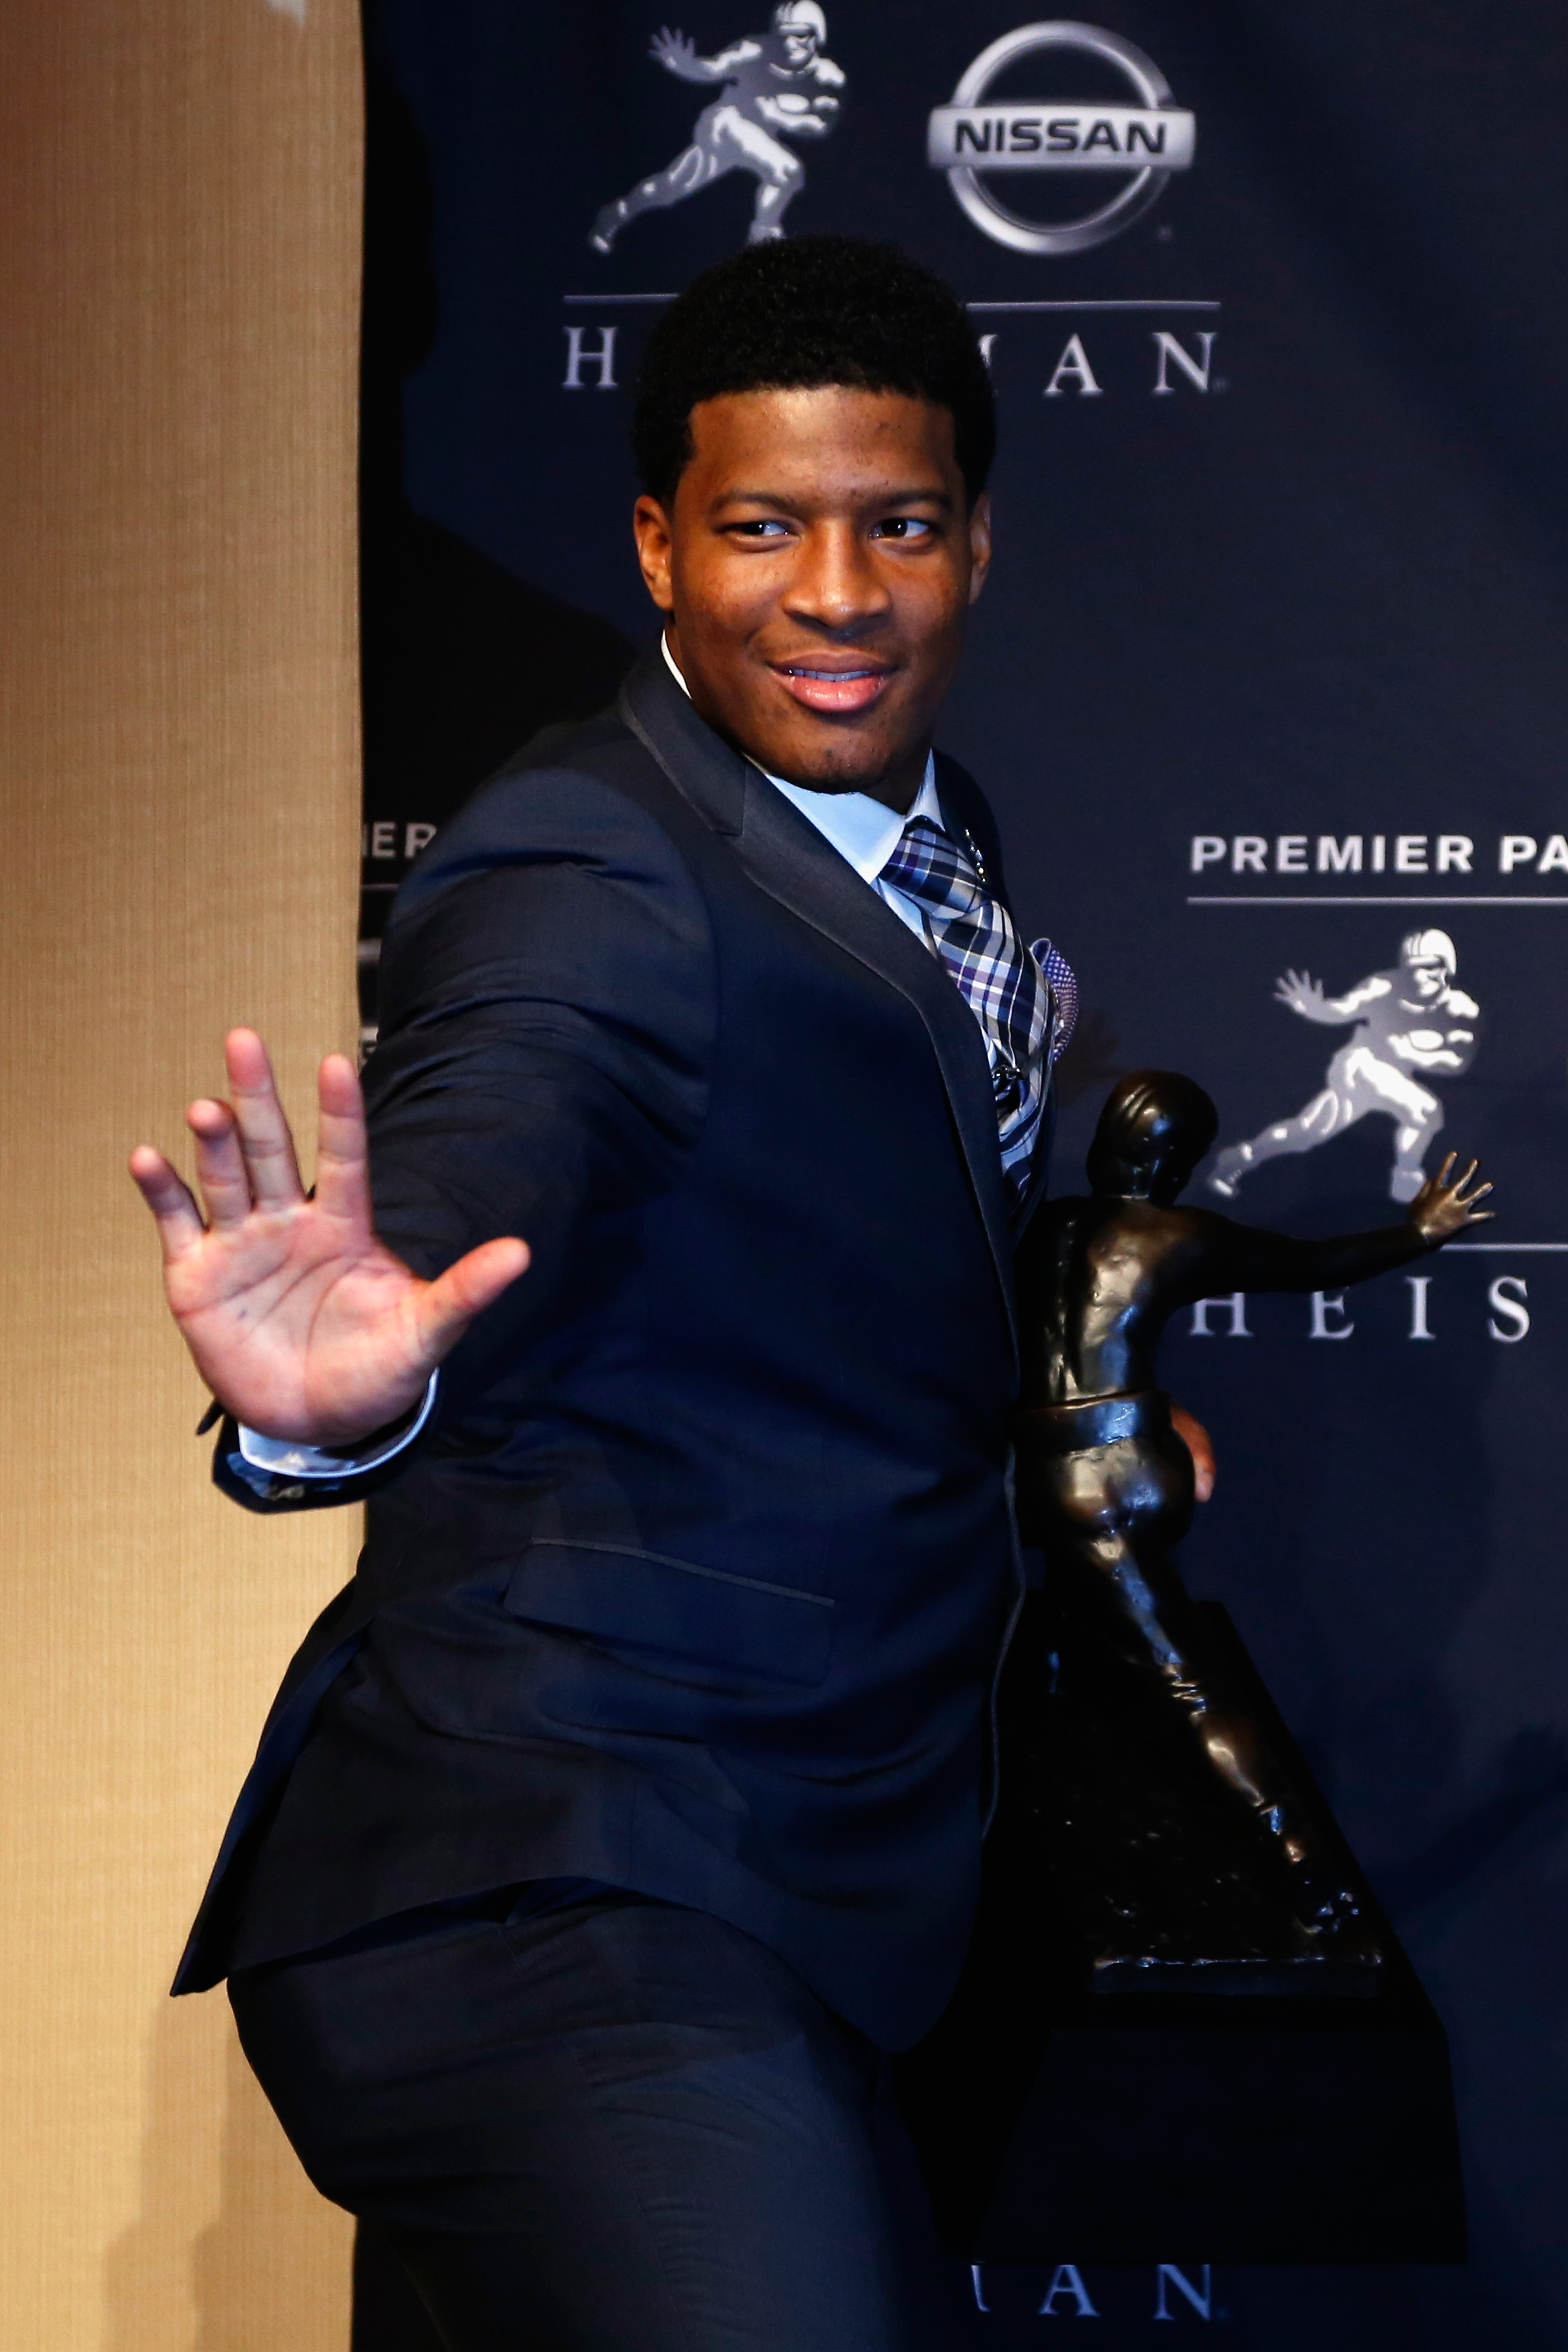 Jameis Winston, quarterback of the Florida State Seminoles, speaks to the media during a press conference after the 2013 Heisman Trophy Presentation at the Marriott Marquis on Dec. 14, 2013 in New York City. (Jeff Zelevansky—Getty Images)